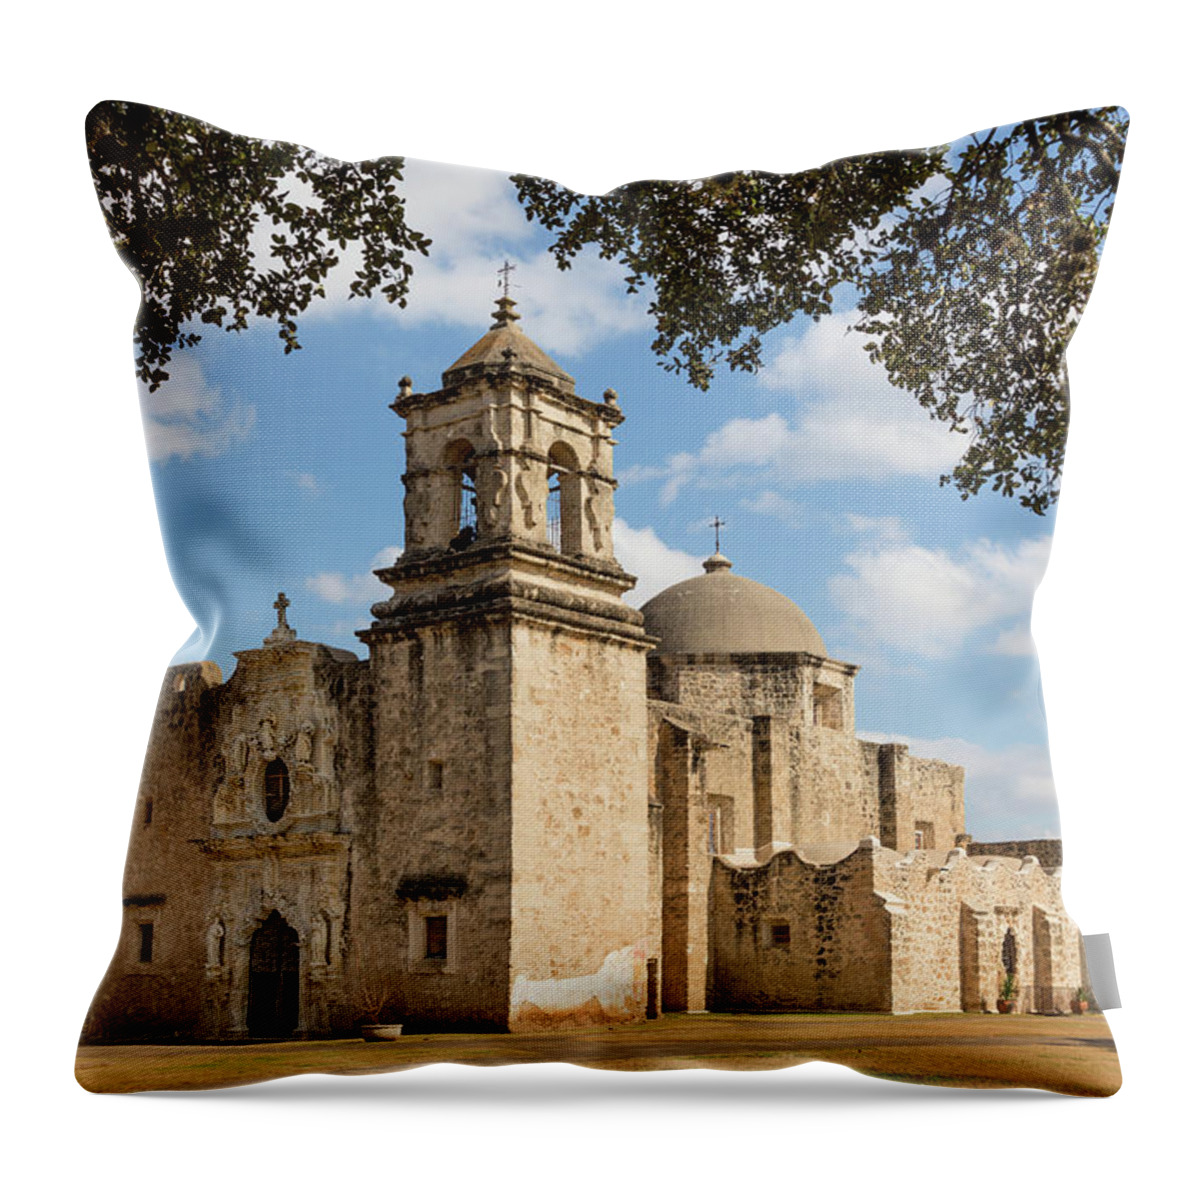 San Antonio Throw Pillow featuring the photograph Mission San Jose by Mary Jo Allen